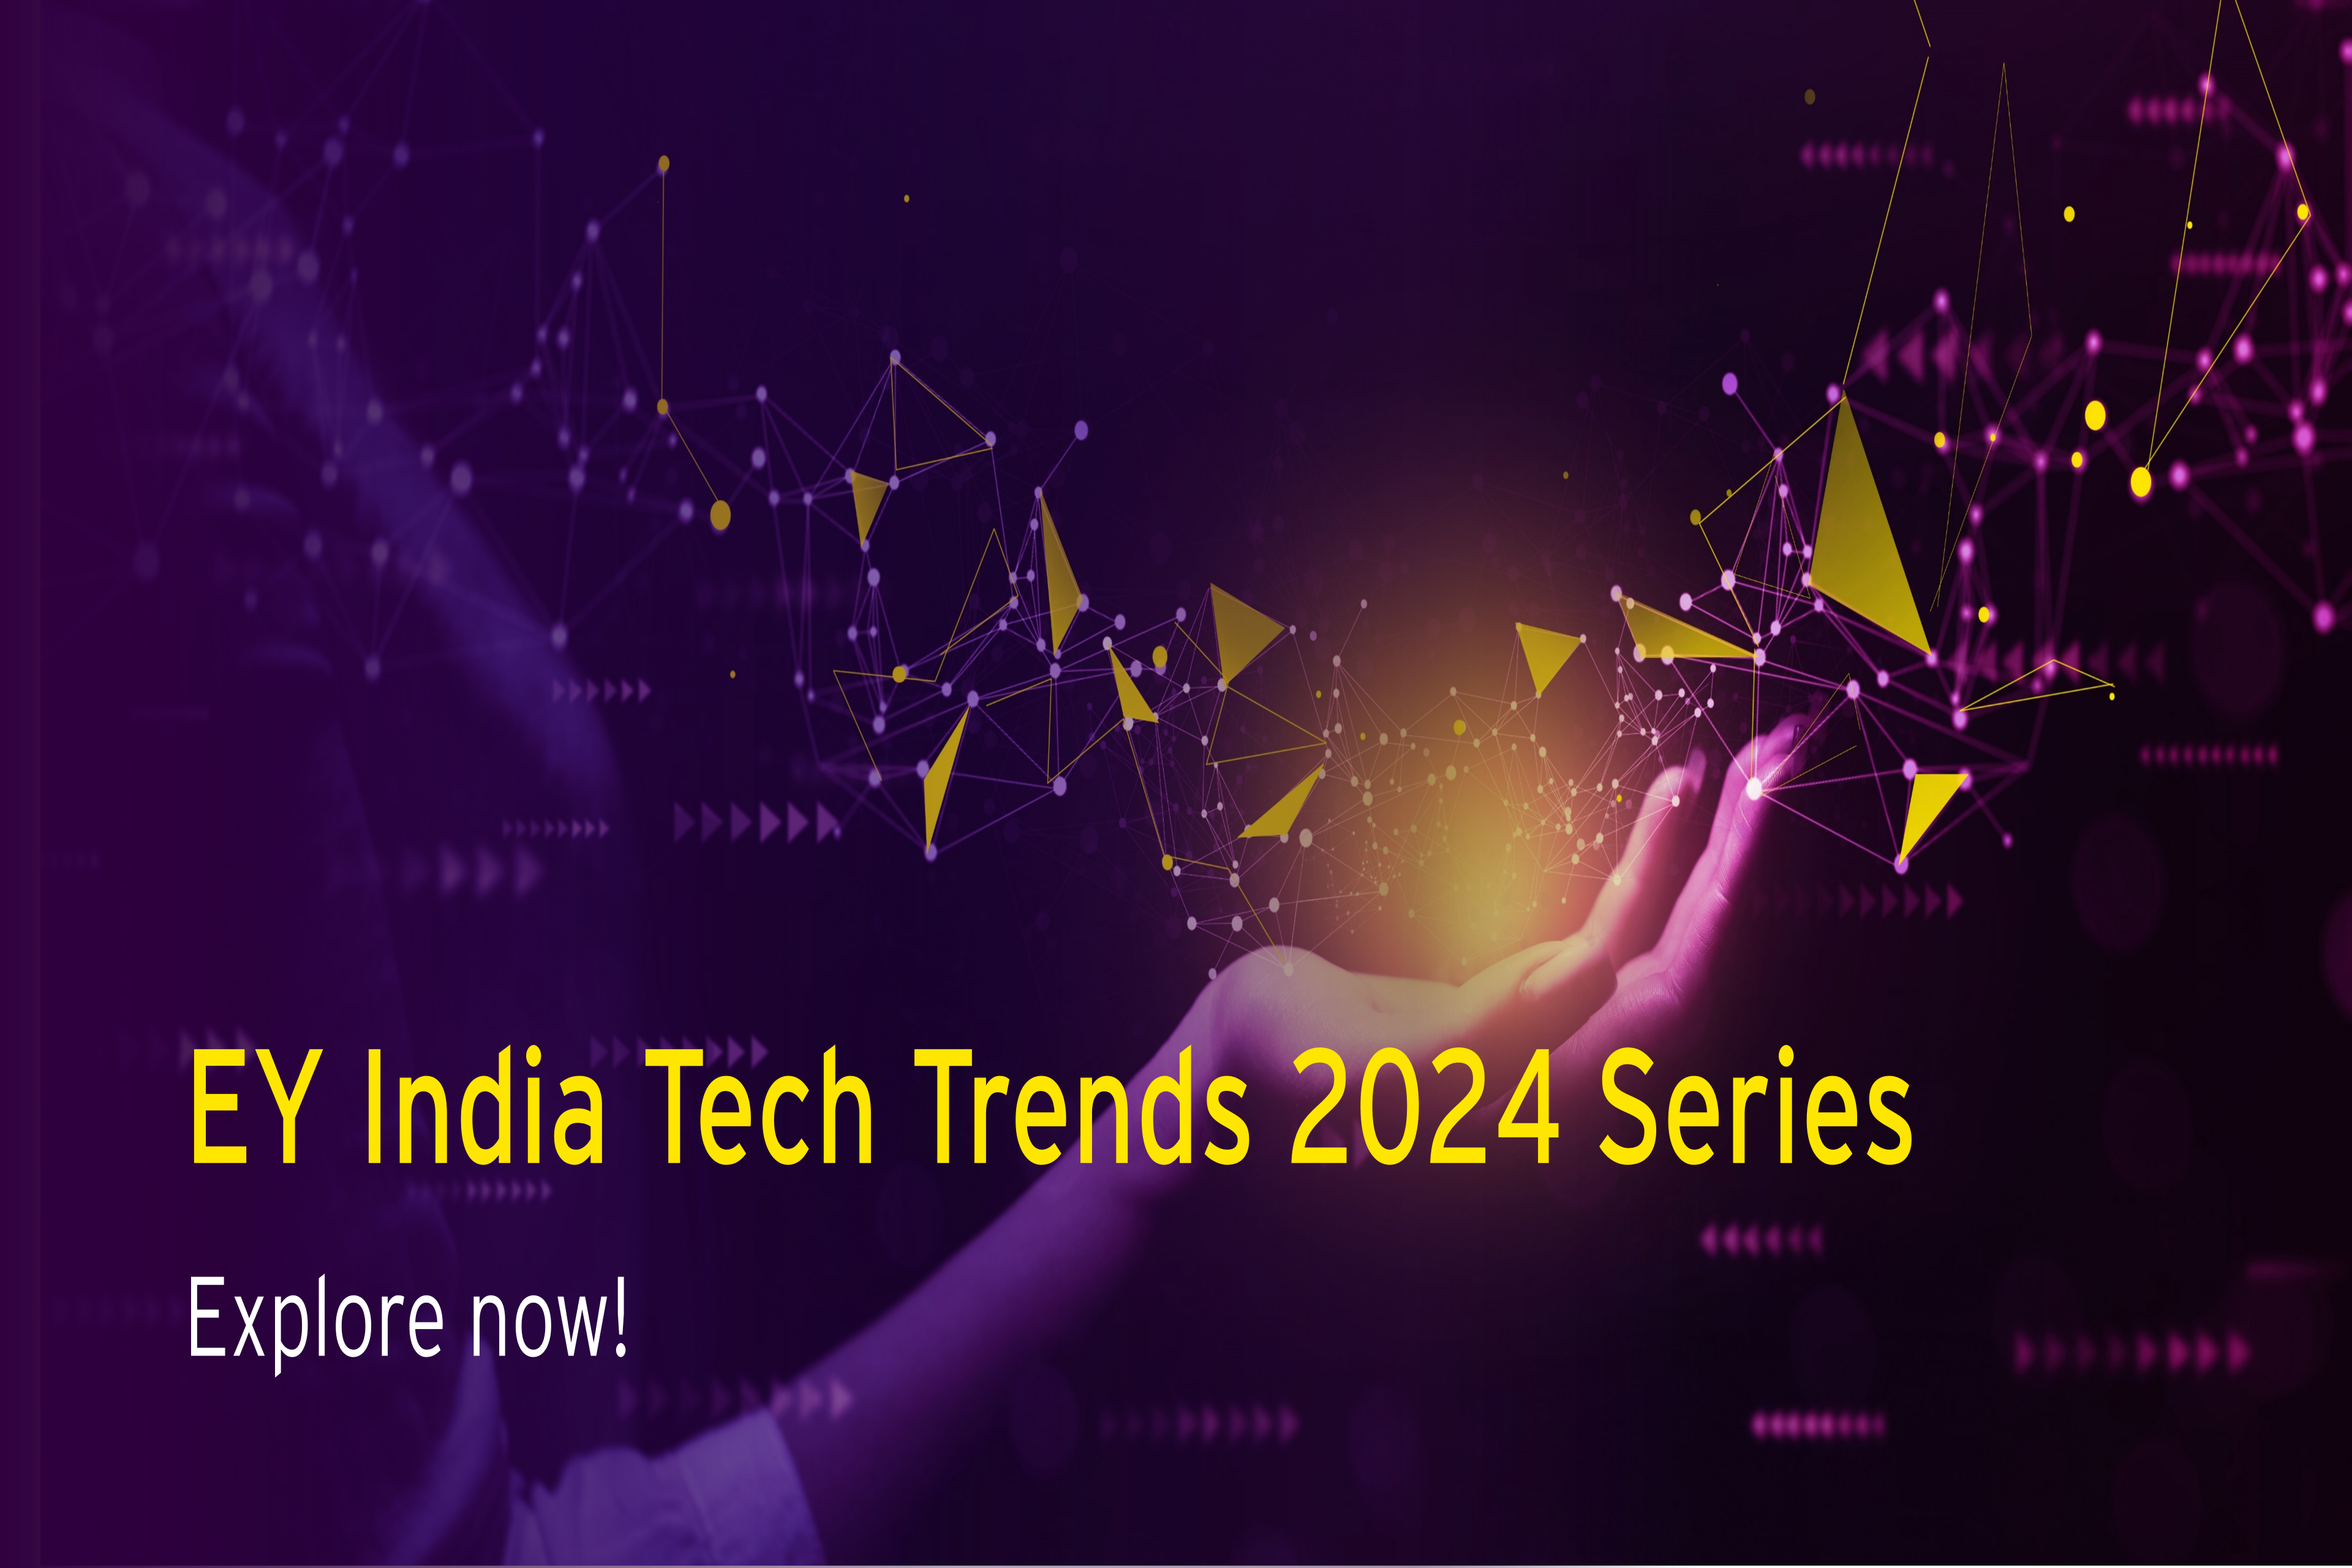 EY India Tech Trends 2024 Series